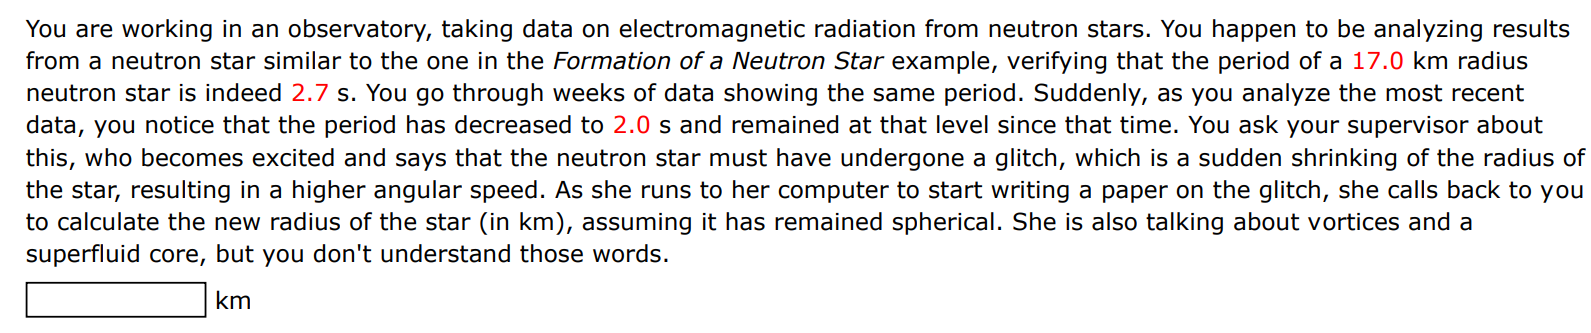 You are working in an observatory, taking data on electromagnetic radiation from neutron stars. You happen to be analyzing results from a neutron star similar to the one in the Formation of a Neutron Star example, verifying that the period of a 17.0 km radius neutron star is indeed 2.7 s. You go through weeks of data showing the same period. Suddenly, as you analyze the most recent data, you notice that the period has decreased to 2.0 s and remained at that level since that time. You ask your supervisor about this, who becomes excited and says that the neutron star must have undergone a glitch, which is a sudden shrinking of the radius of the star, resulting in a higher angular speed. As she runs to her computer to start writing a paper on the glitch, she calls back to you to calculate the new radius of the star (in km ), assuming it has remained spherical. She is also talking about vortices and a superfluid core, but you don't understand those words. km 